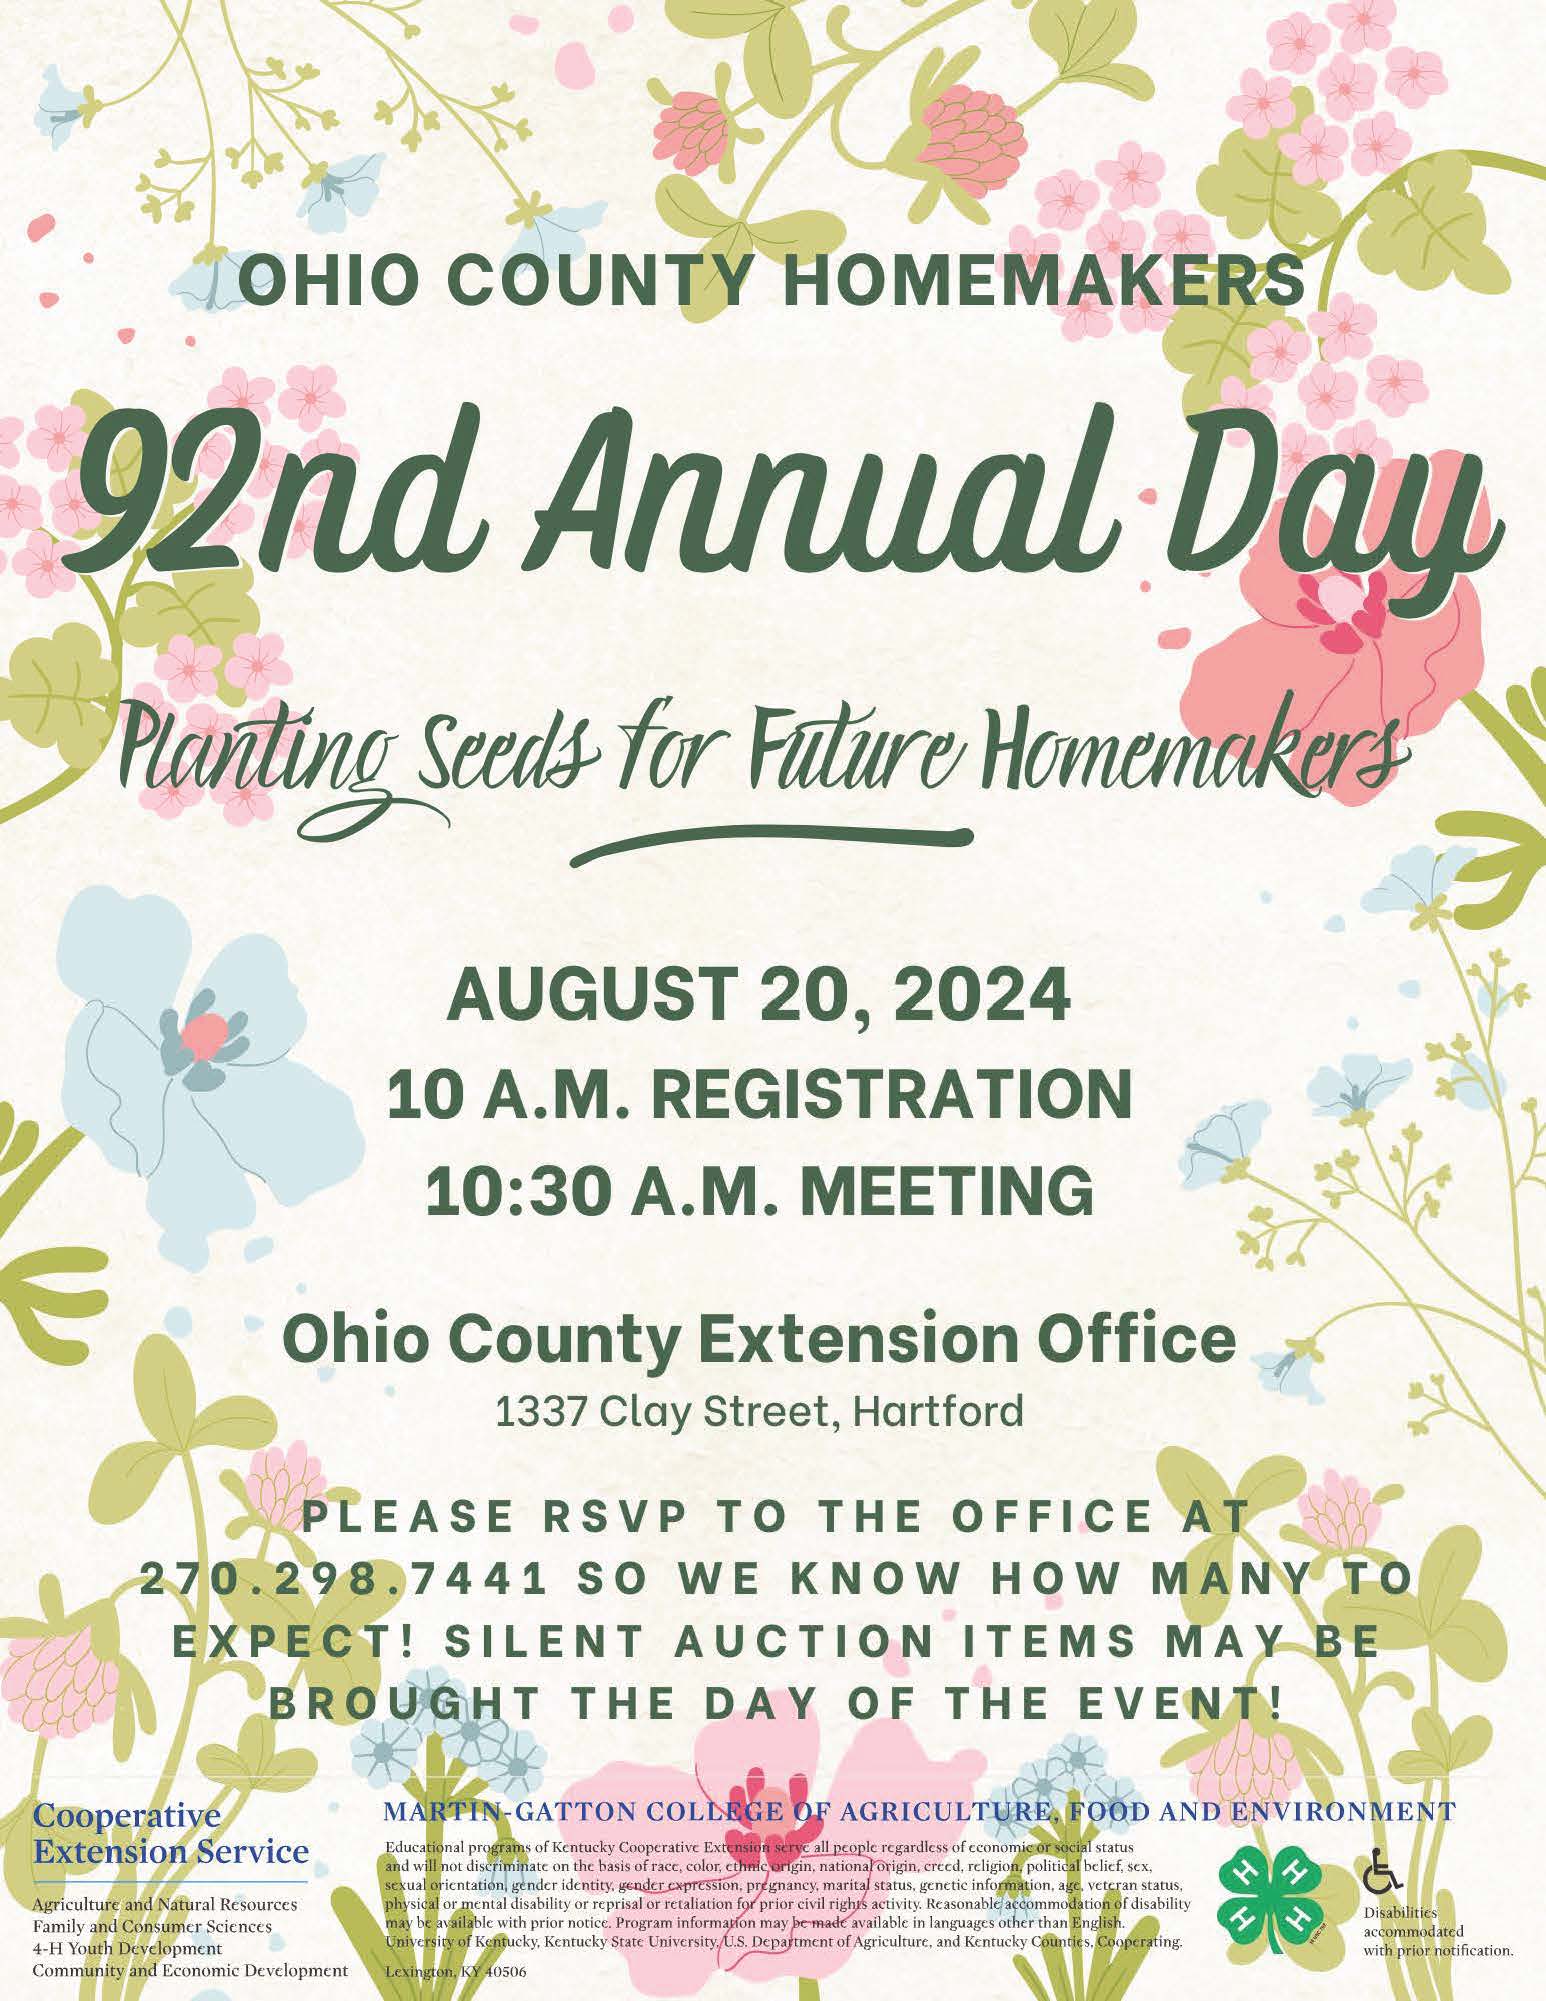 Homemaker's 92nd Annual Day